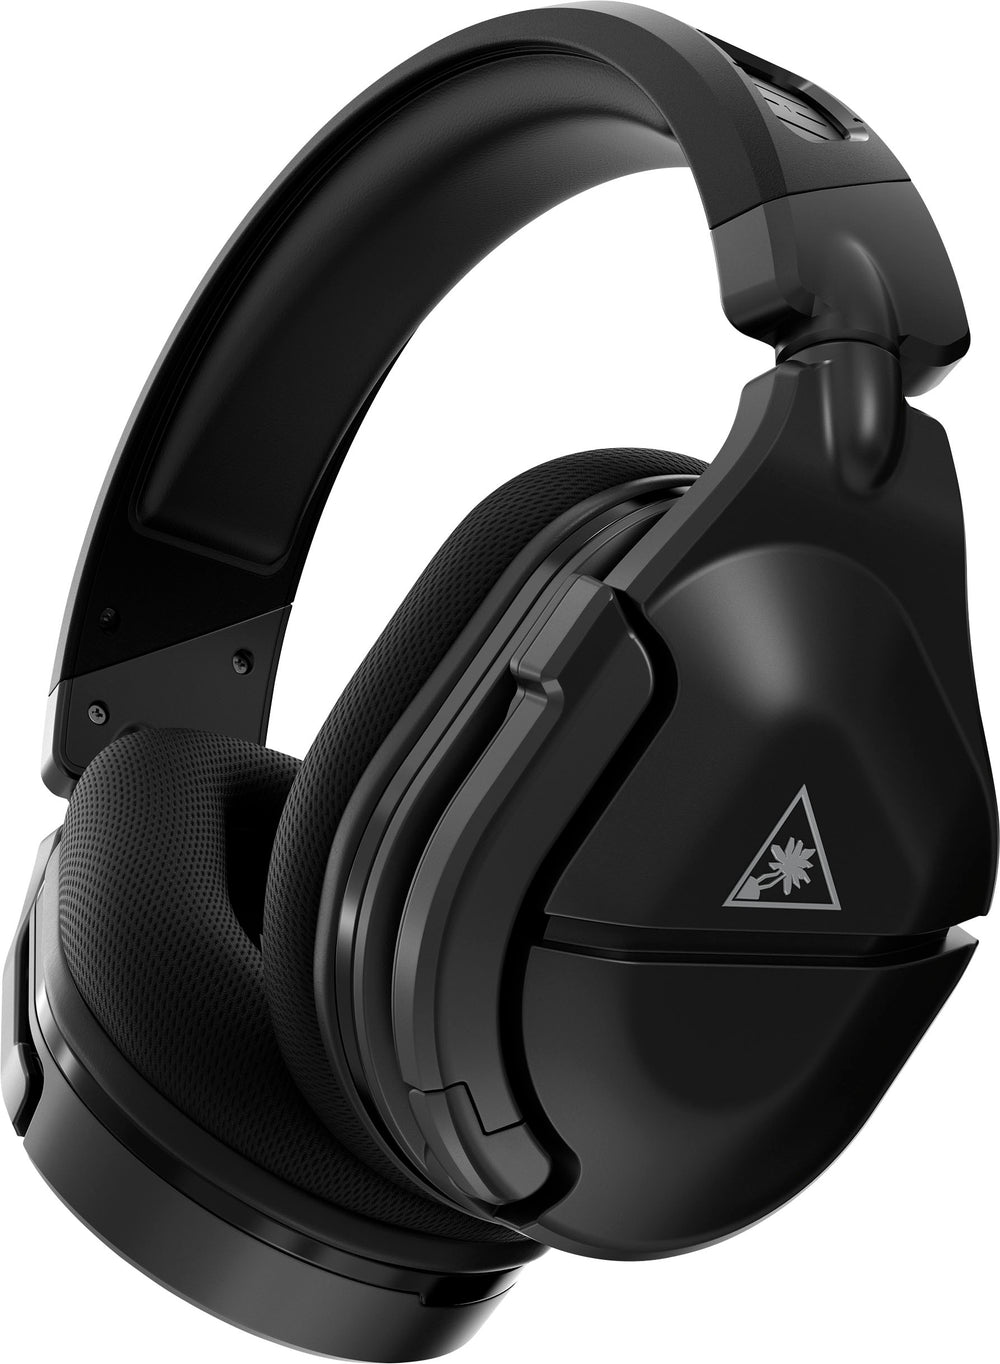 Turtle Beach - Stealth 600 Gen 2 MAX Wireless Multiplatform Gaming Headset for Xbox Series X, Xbox Series S, PS5, Nintendo Switch, PC - Black_1